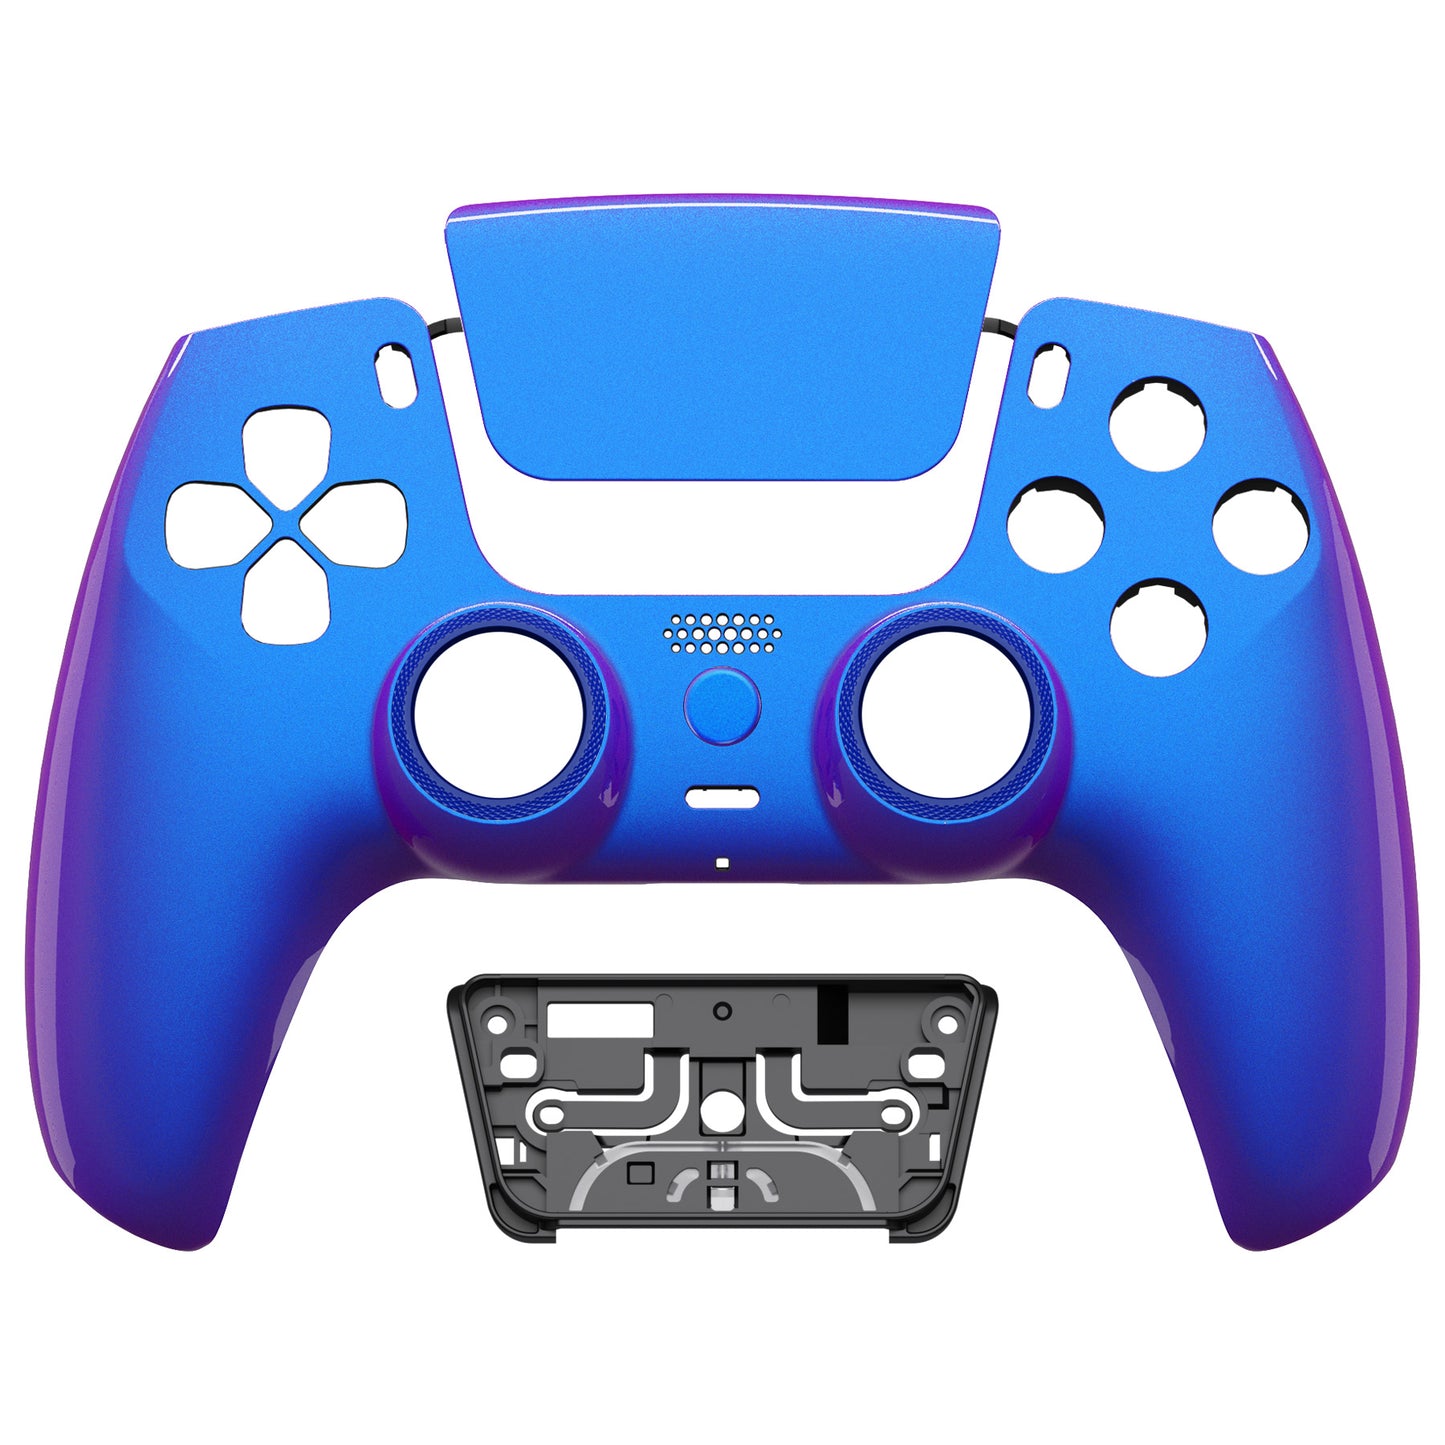 eXtremeRate LUNA Redesigned Replacement Front Shell with Touchpad Compatible with PS5 Controller BDM-010/020/030/040 - Chameleon Purple Blue eXtremeRate